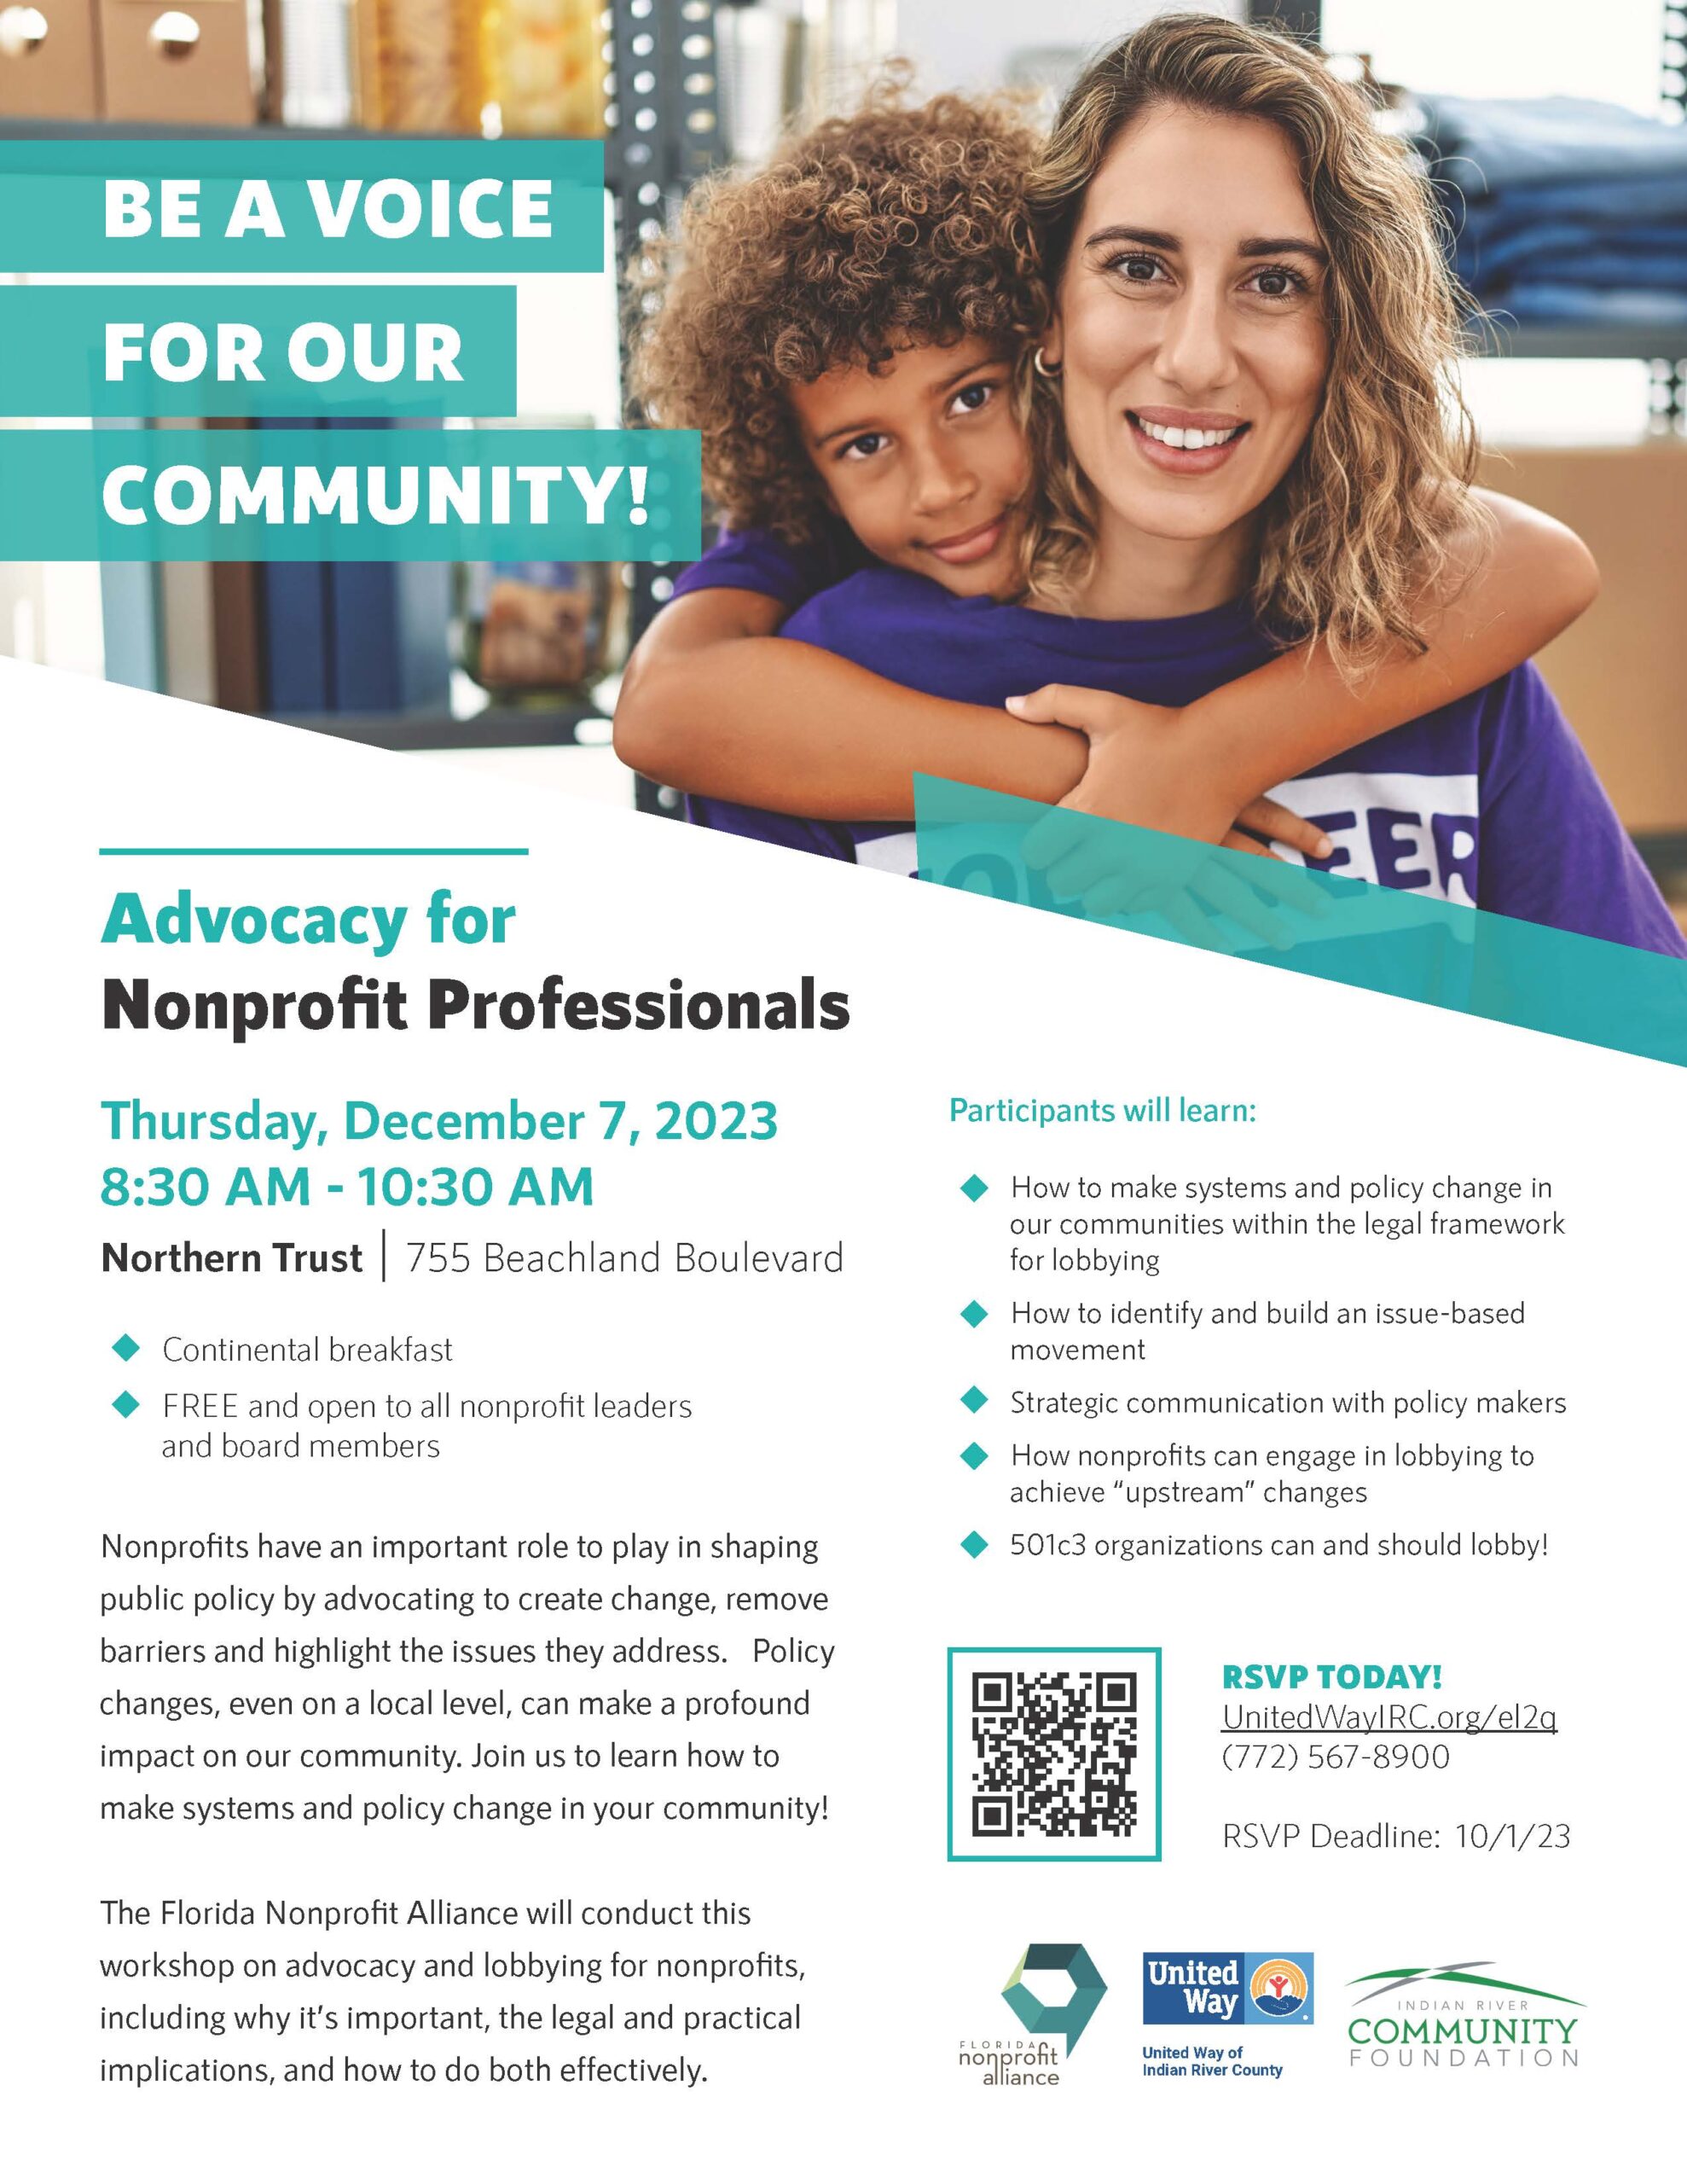 Register for the 2023 Advocacy for Nonprofit Professionals Event